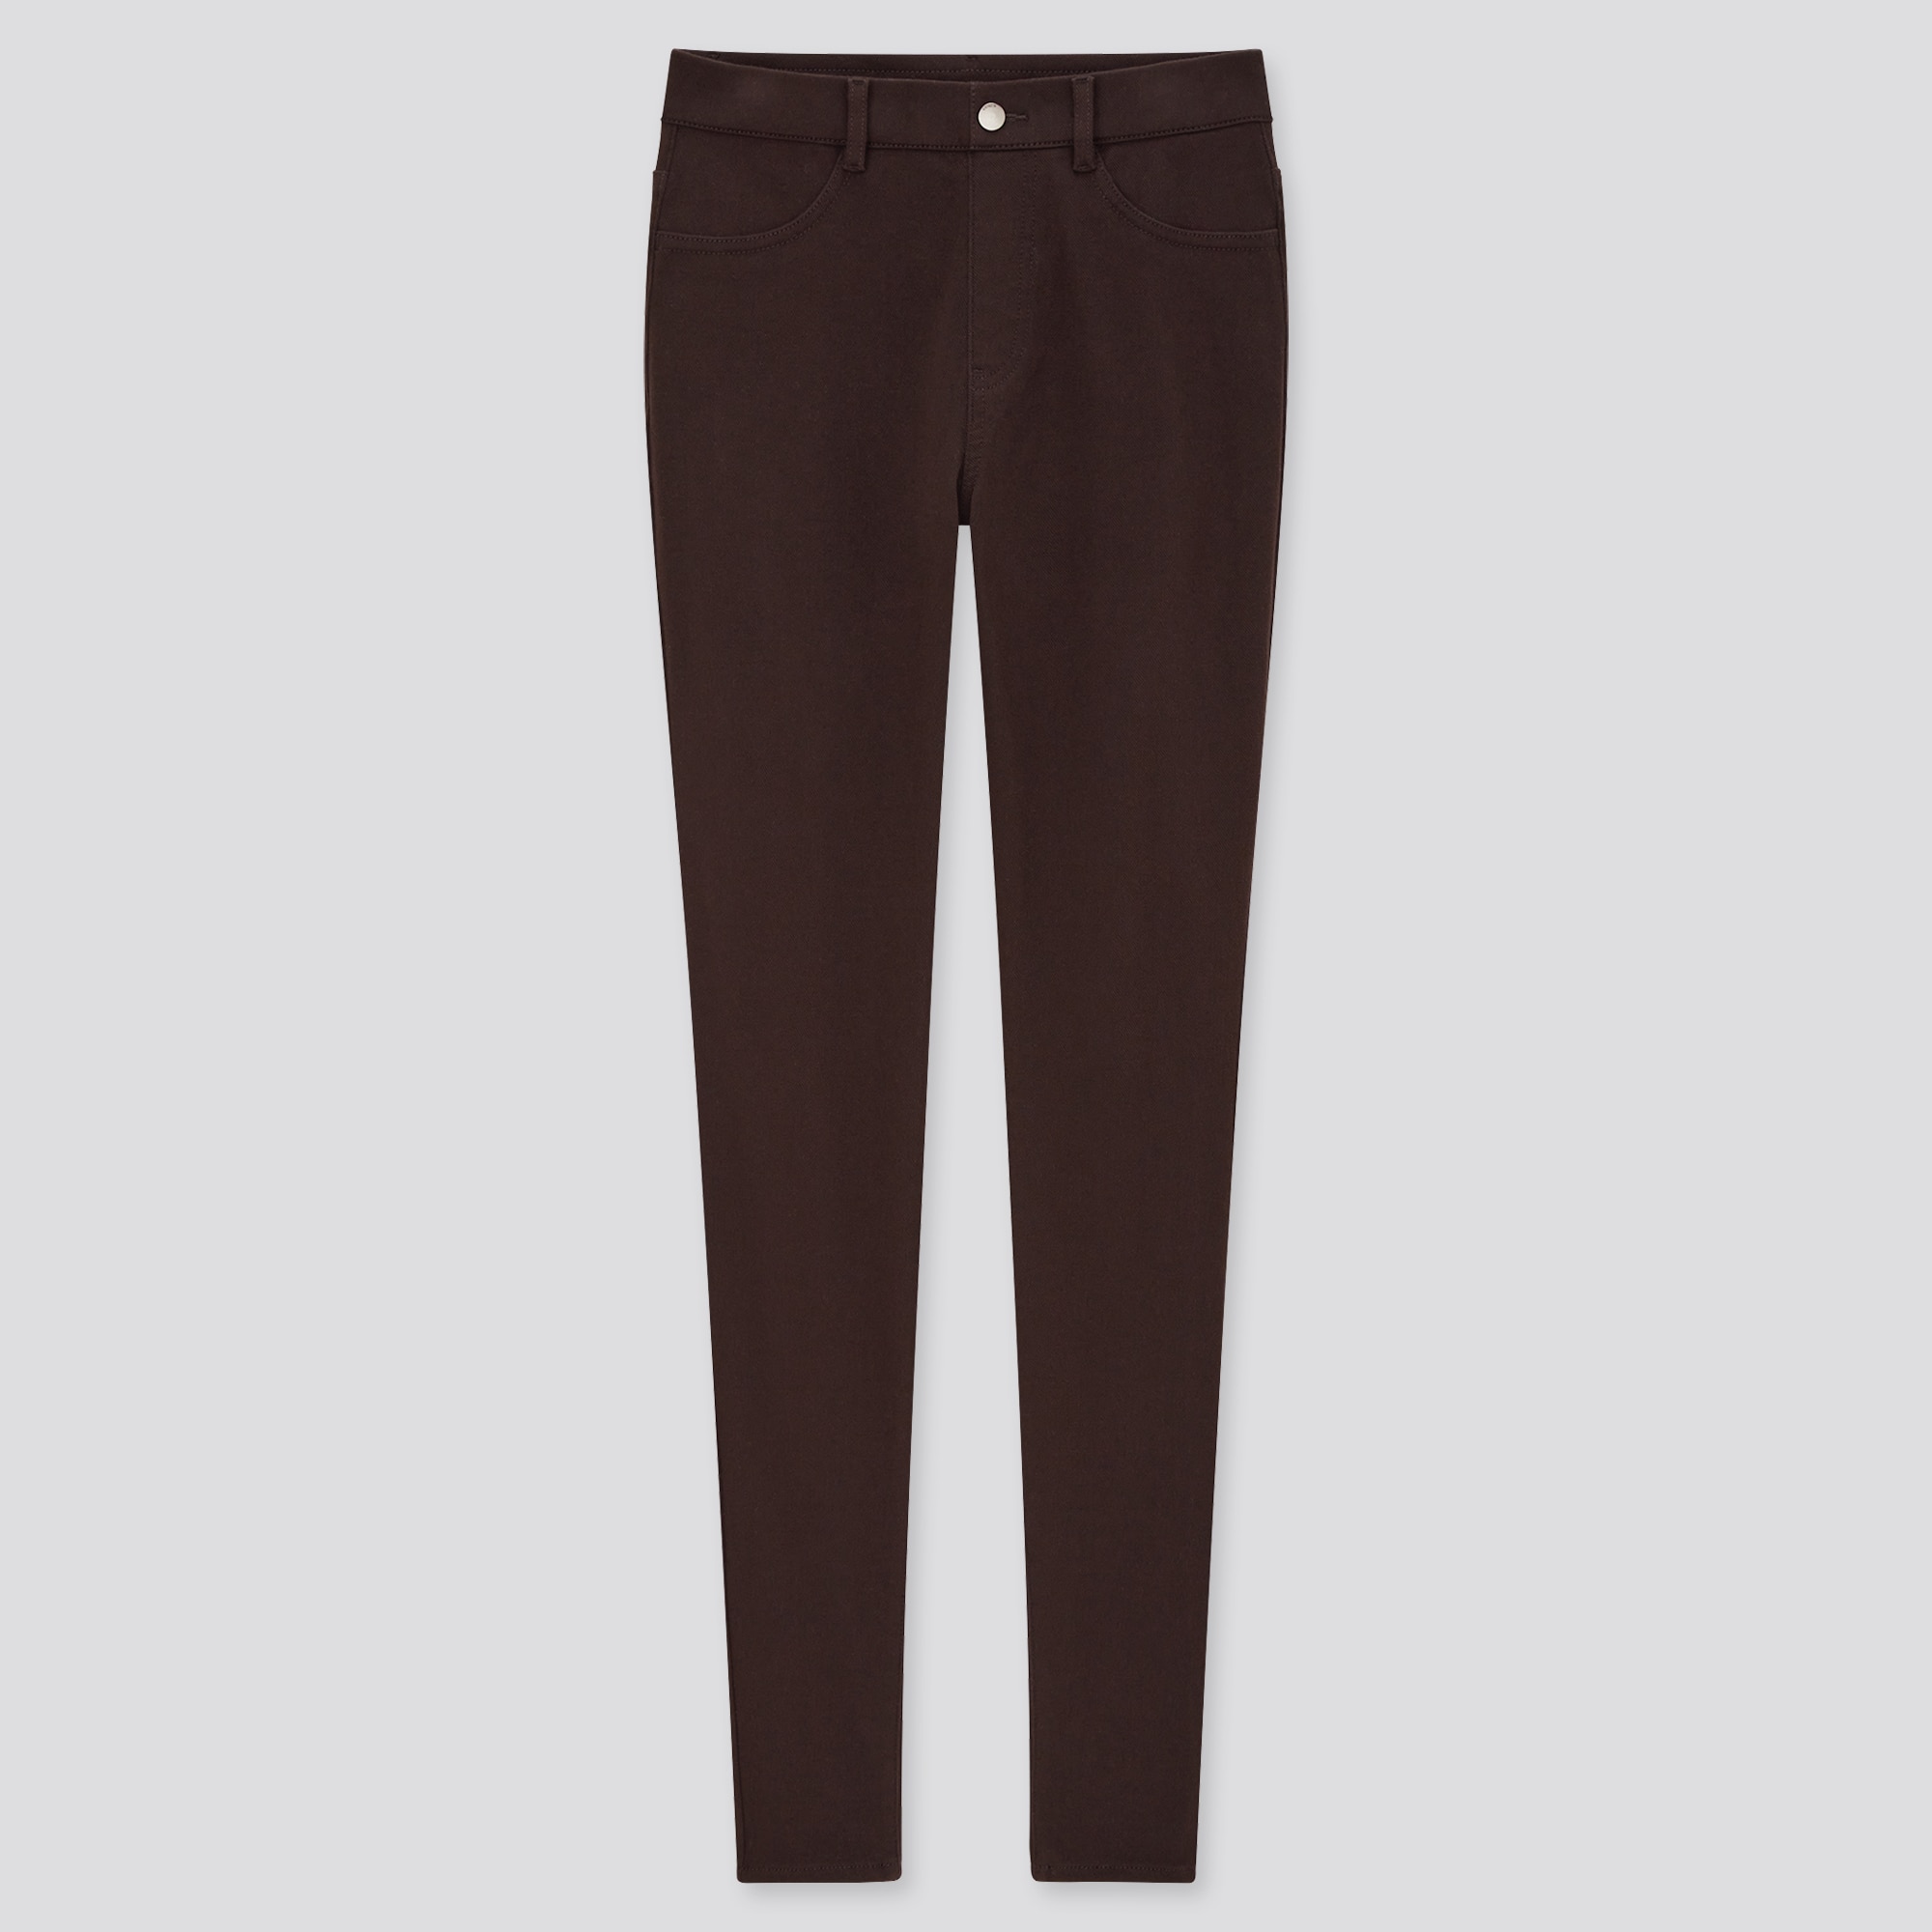 Ultra Stretch Leggings Pants Uniqlo Heattech  International Society of  Precision Agriculture